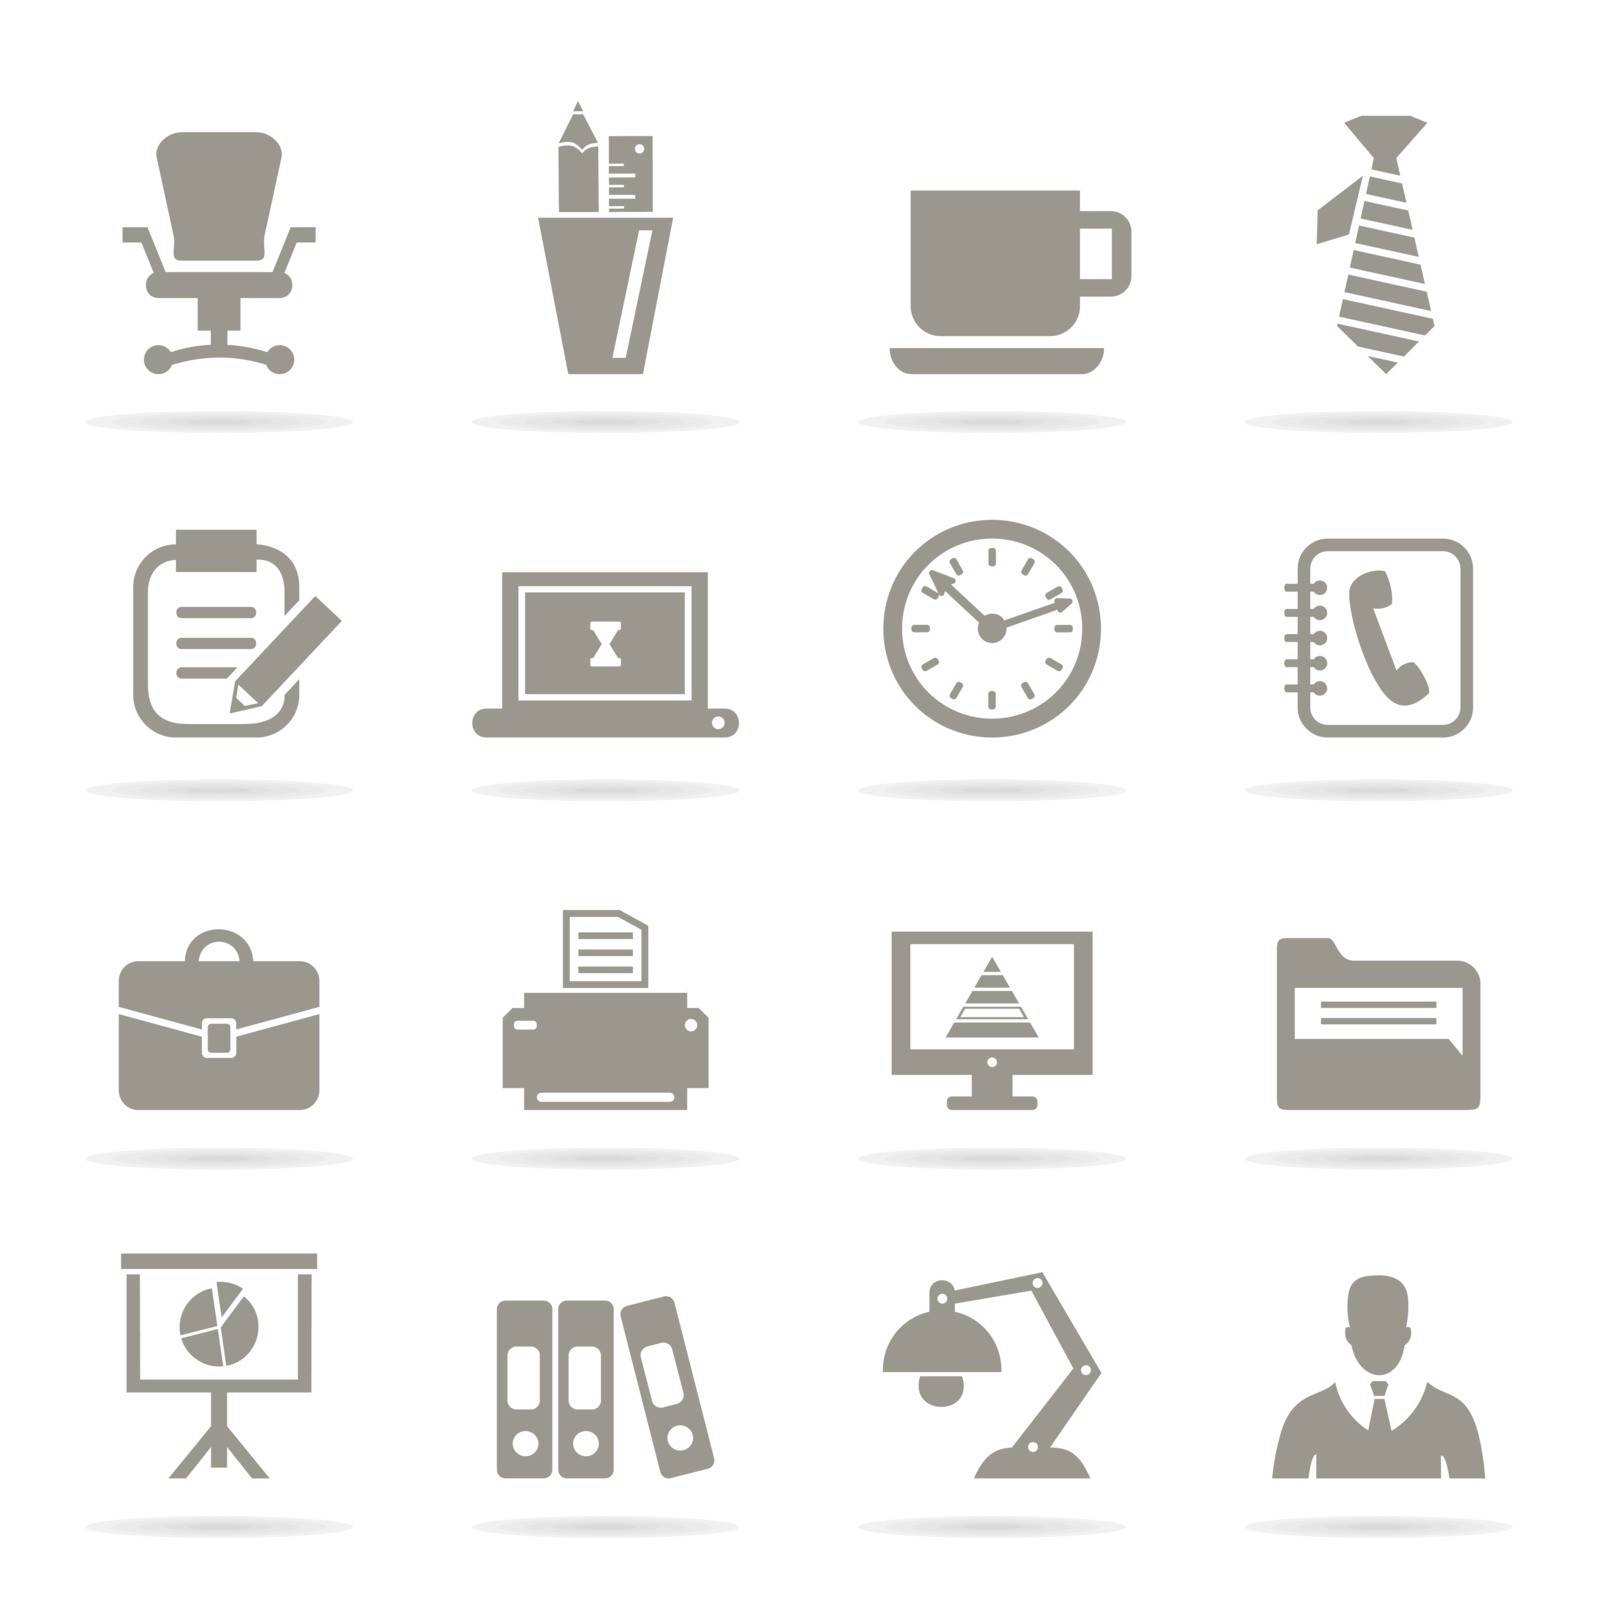 Office icons9 by aleksander1